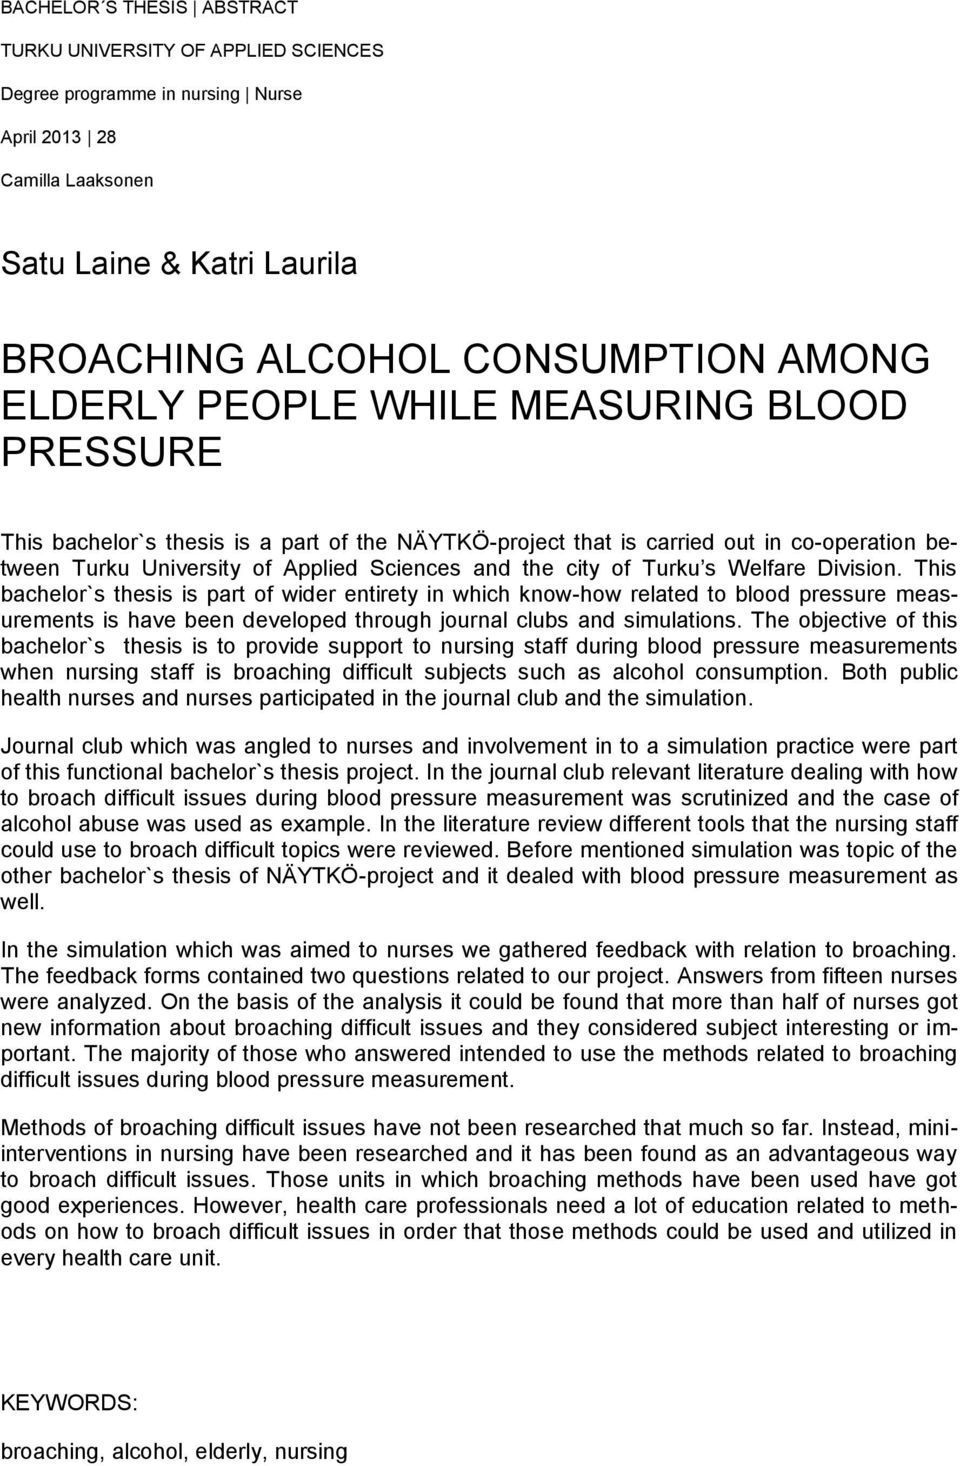 Turku s Welfare Division. This bachelor`s thesis is part of wider entirety in which know-how related to blood pressure measurements is have been developed through journal clubs and simulations.